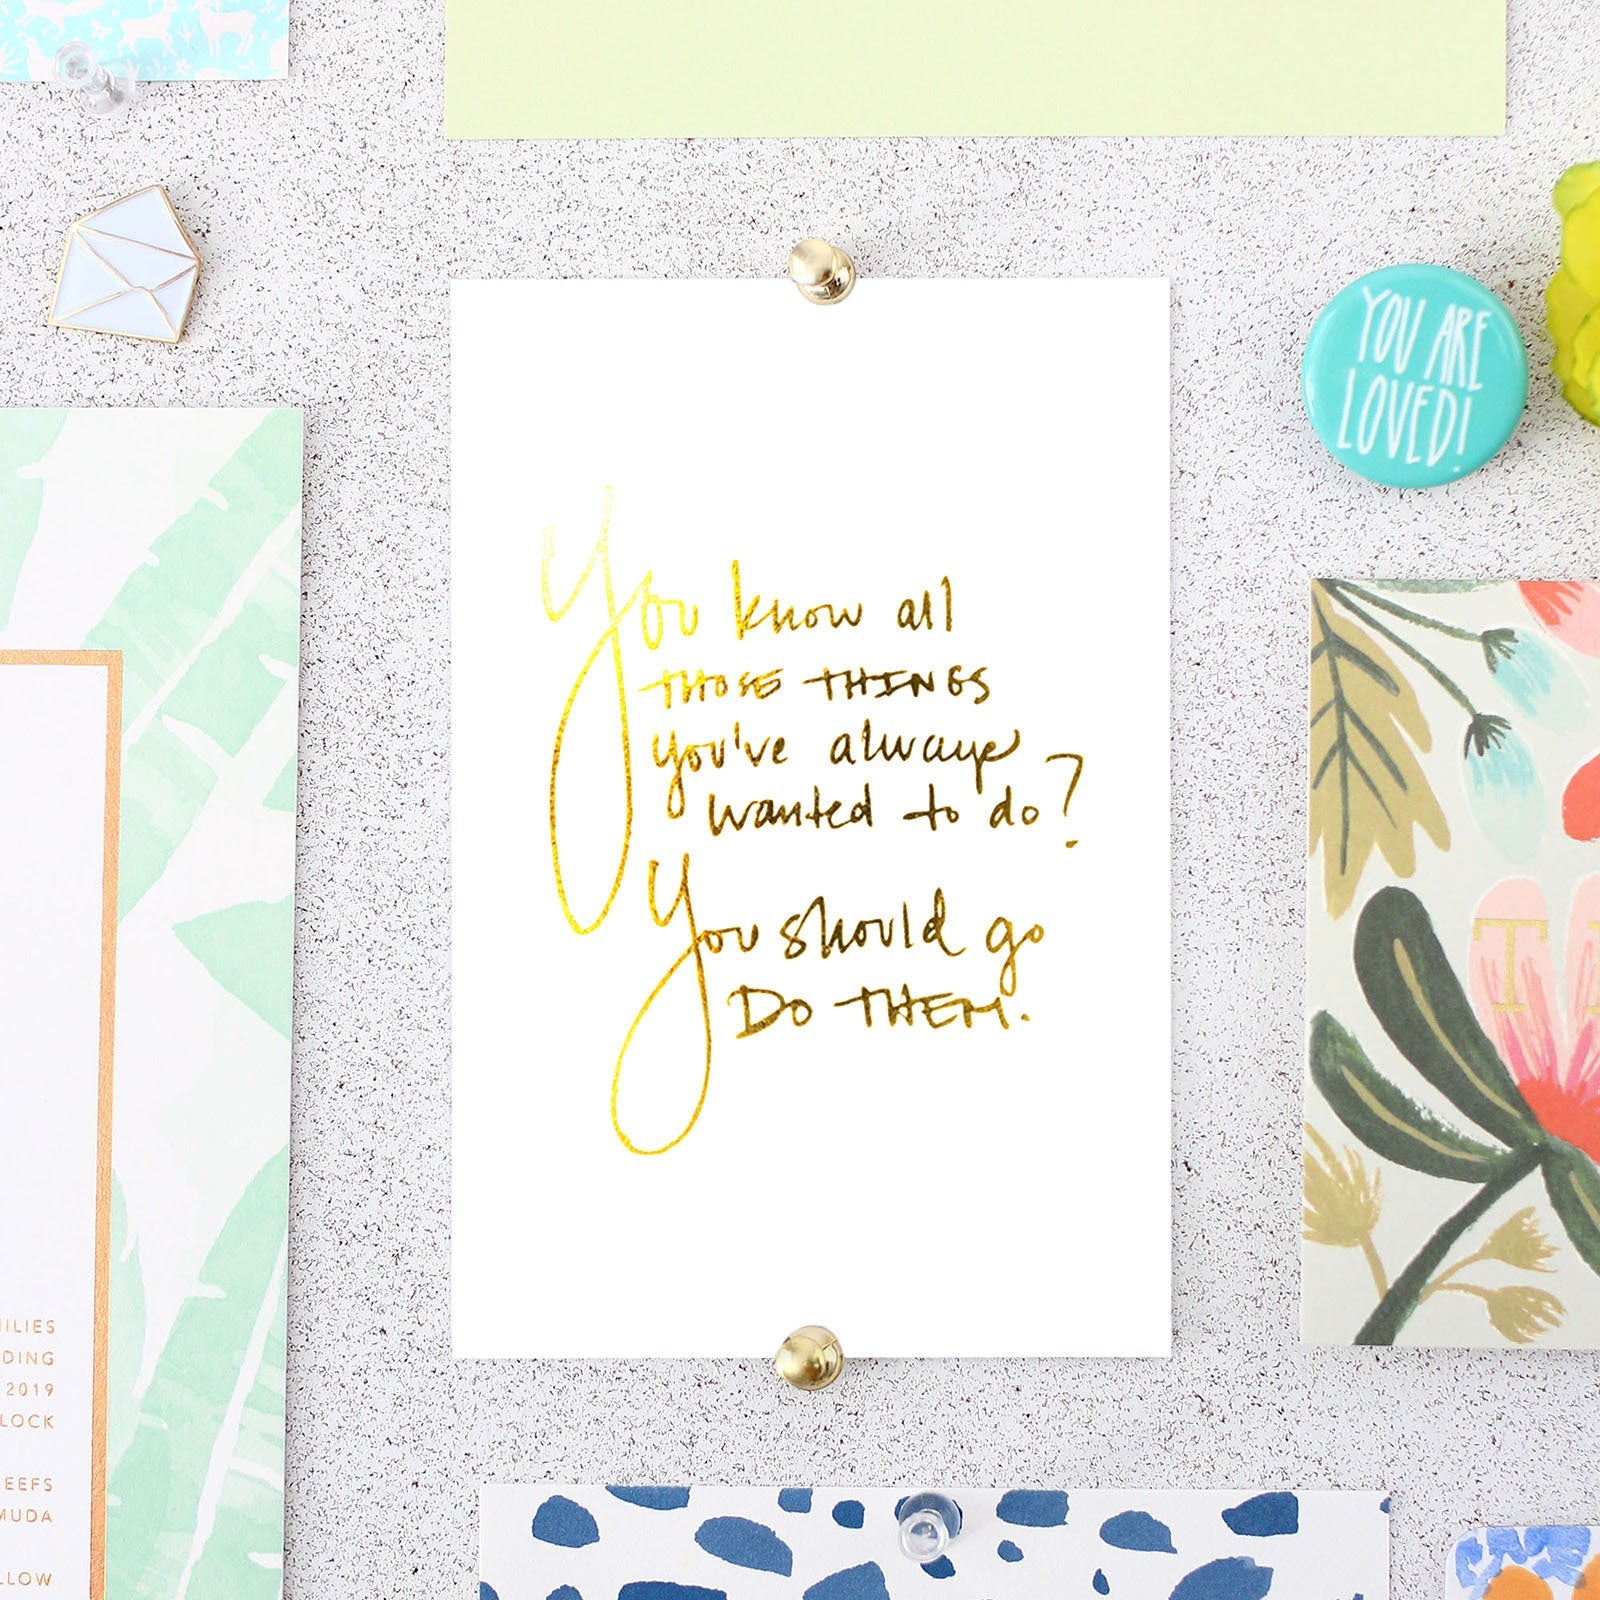 Cultivate What Matters - Art Print - You Know All Those Things - Gold Foil